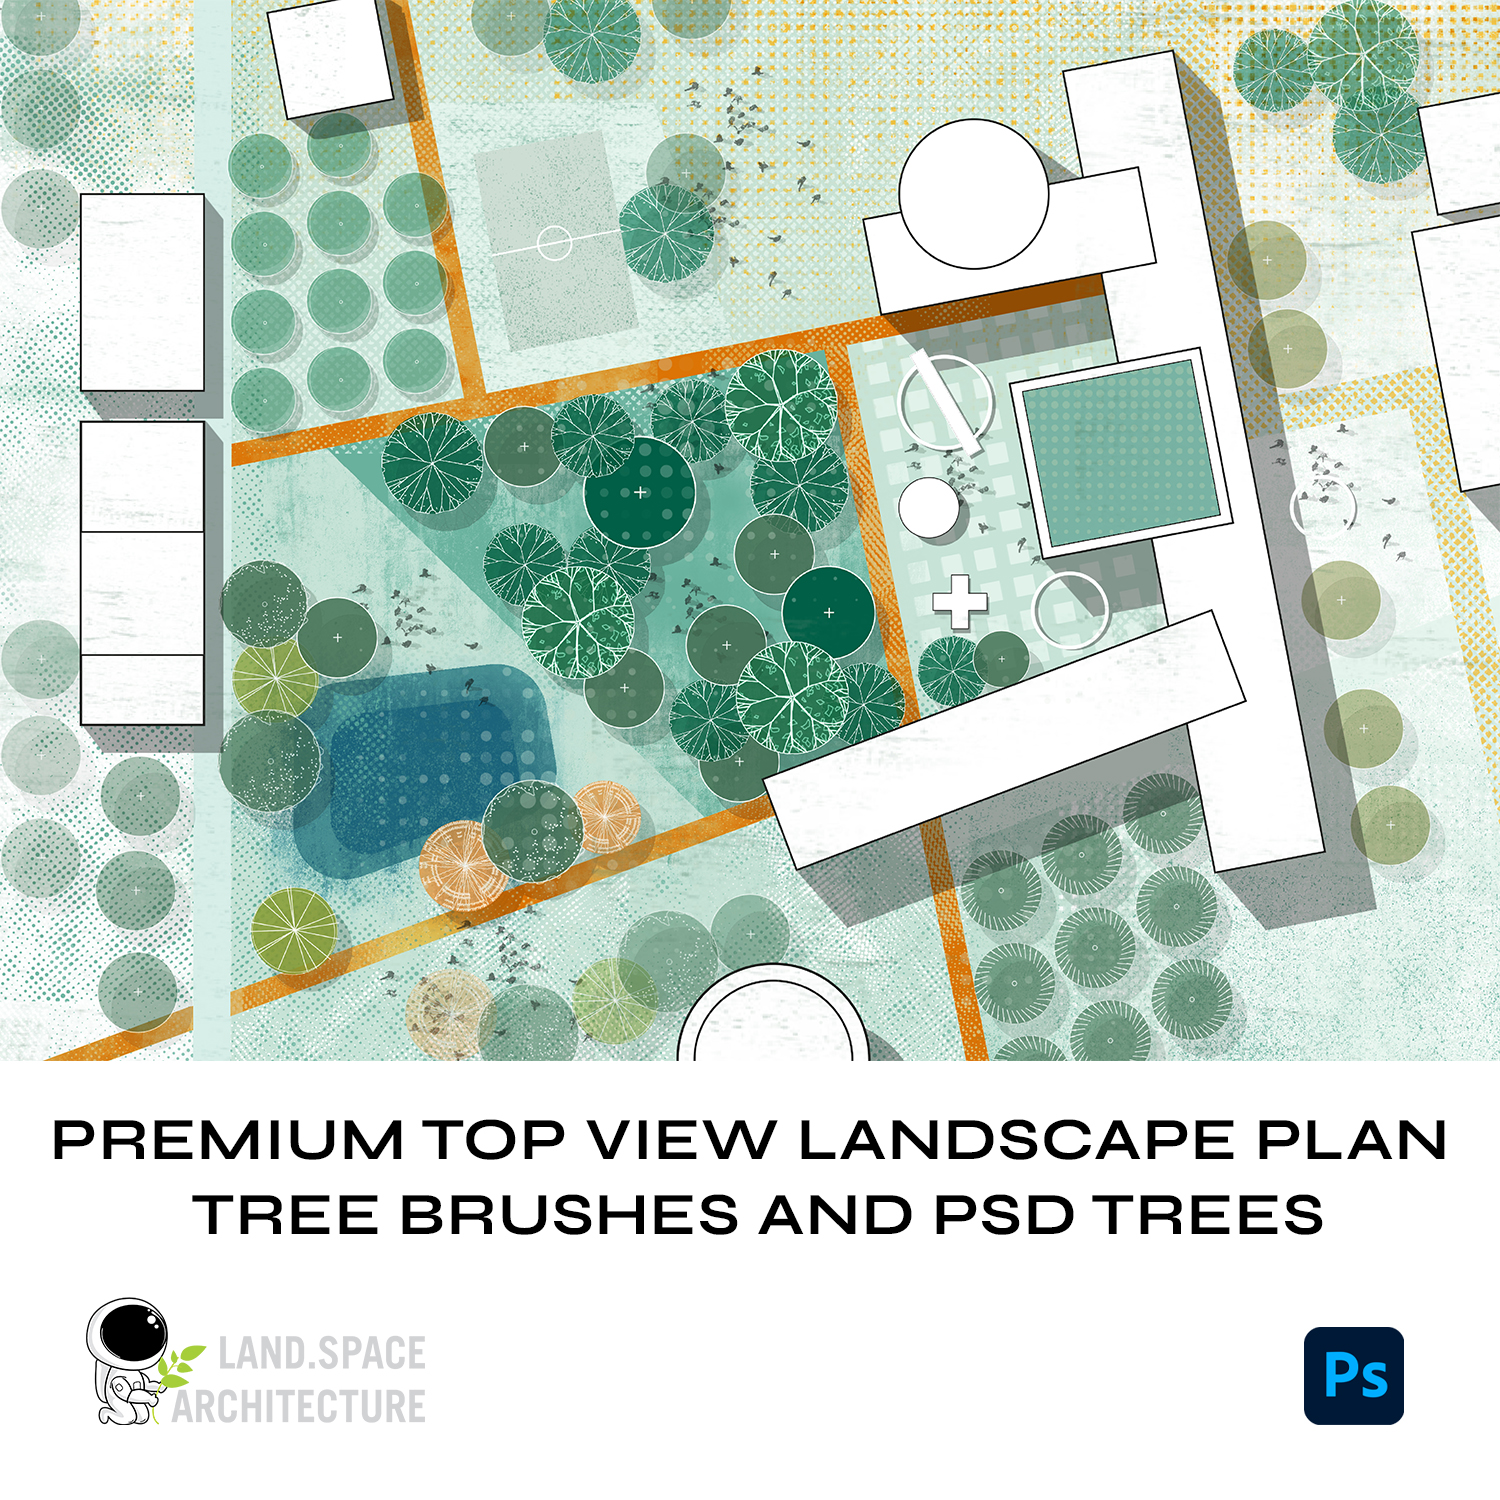 Premium Top View Landscape Plan Tree Brushes and PSD Trees